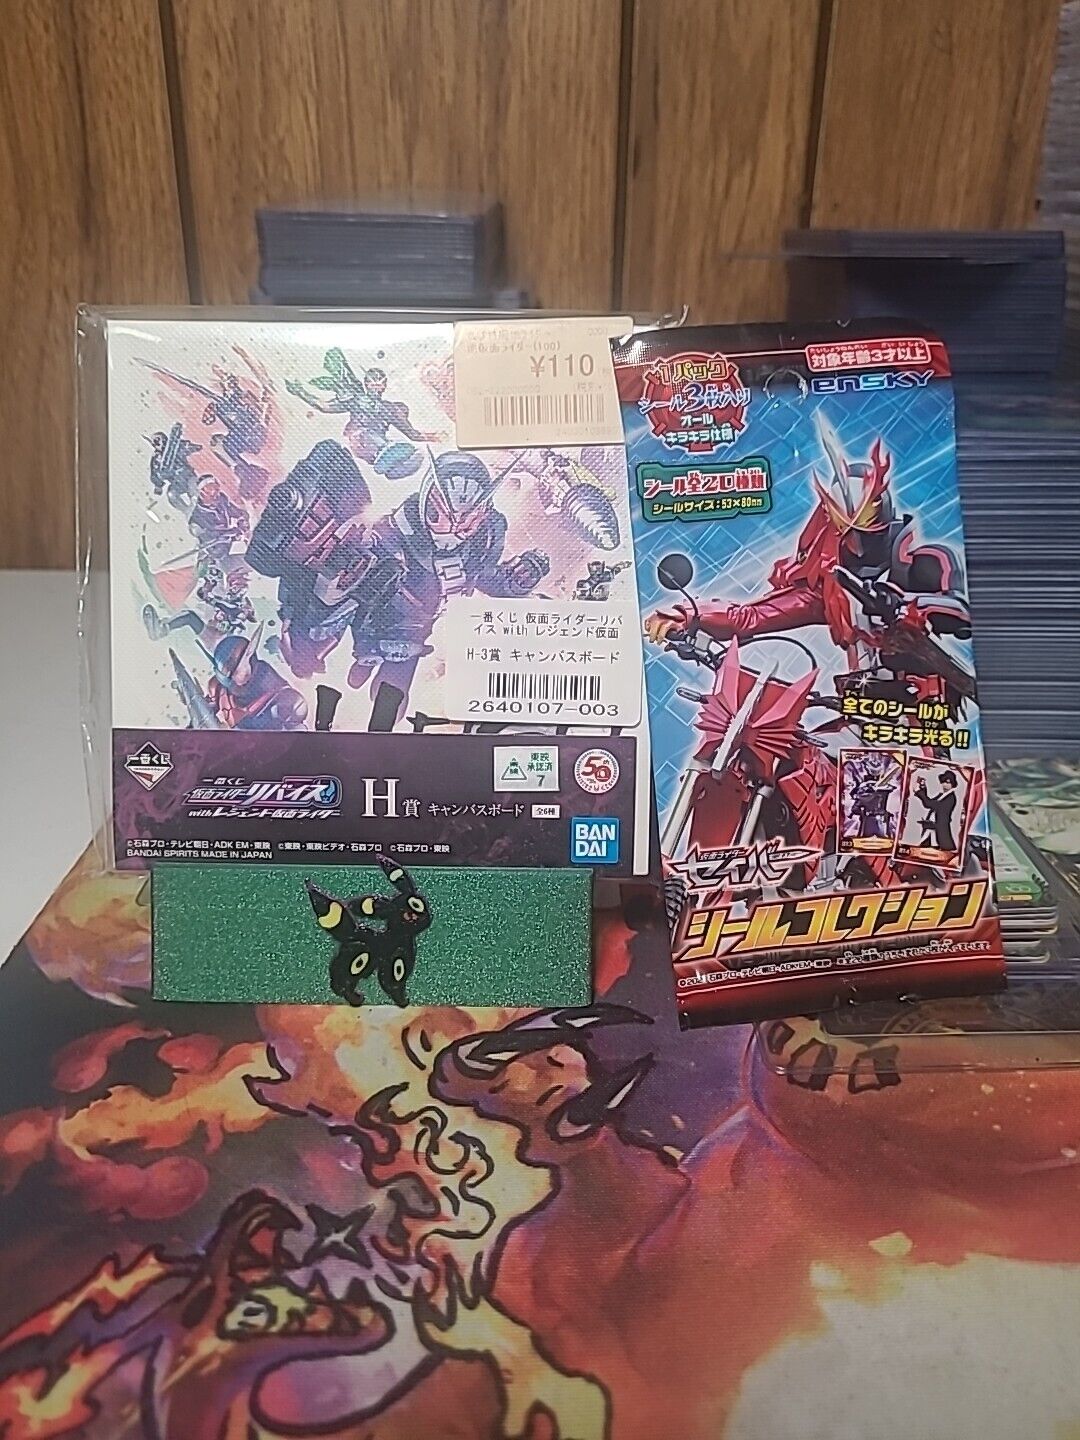 New Kamen Rider H3. Size Mini Shikishi Canvas Art from Japan. And Promo Pack 